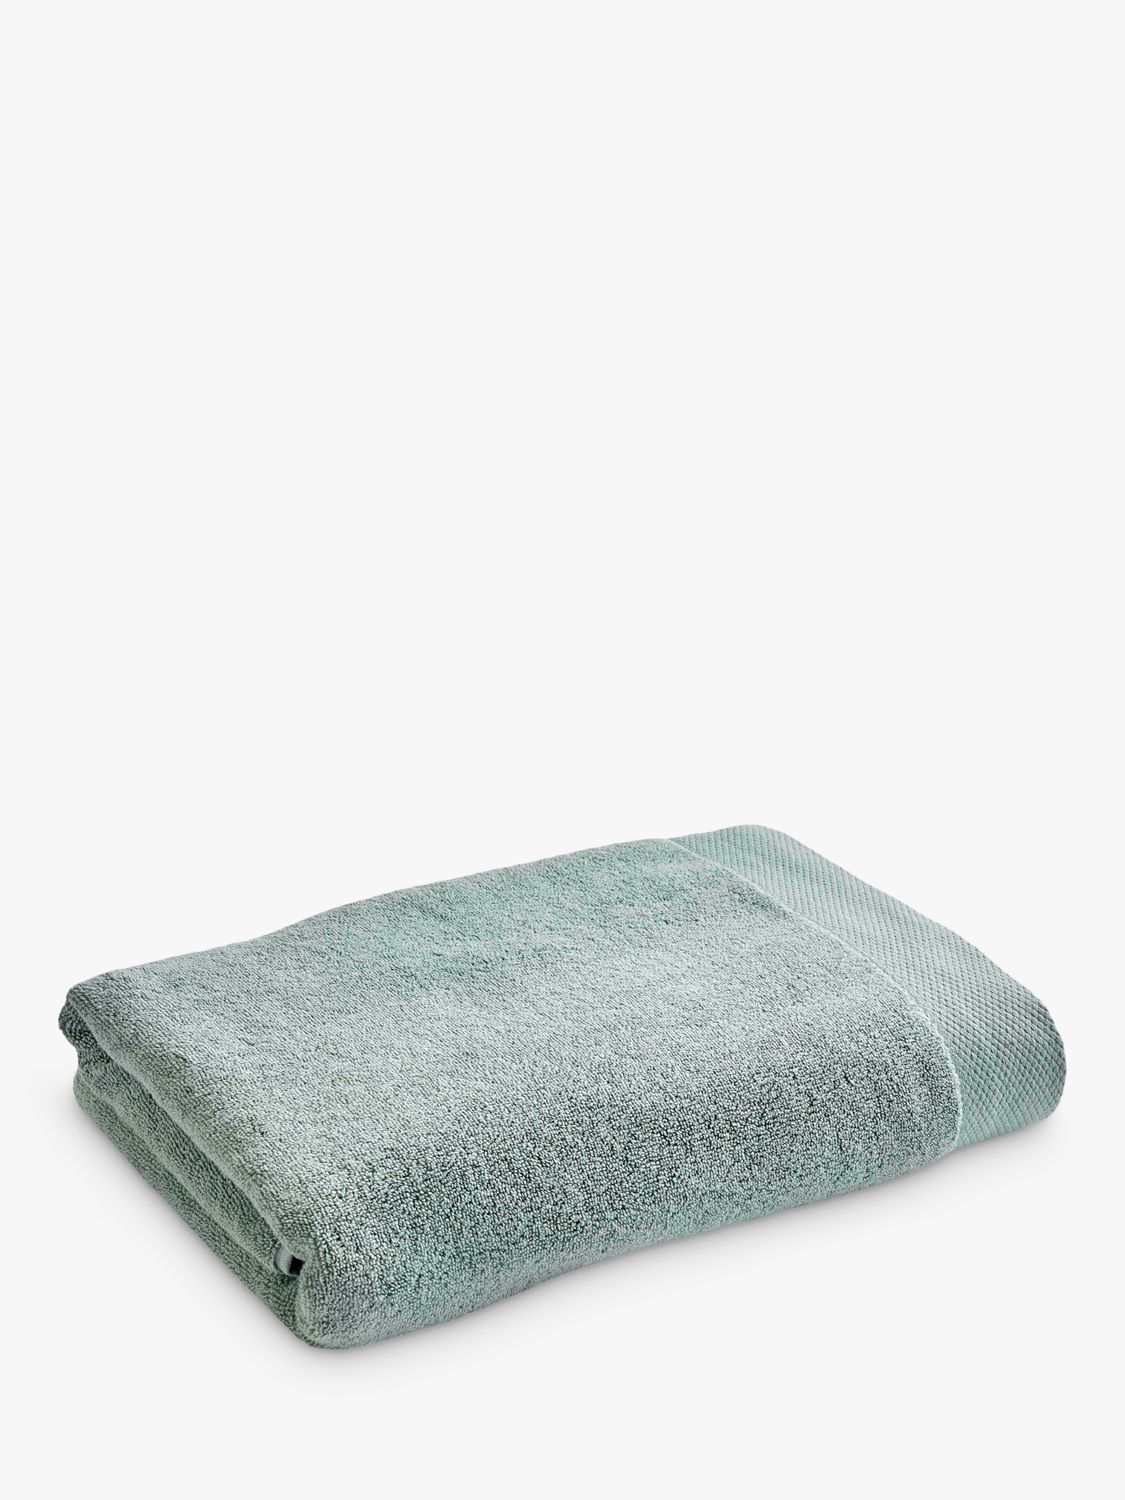 Christy Luxe Bath Towels Collection in Surf Green